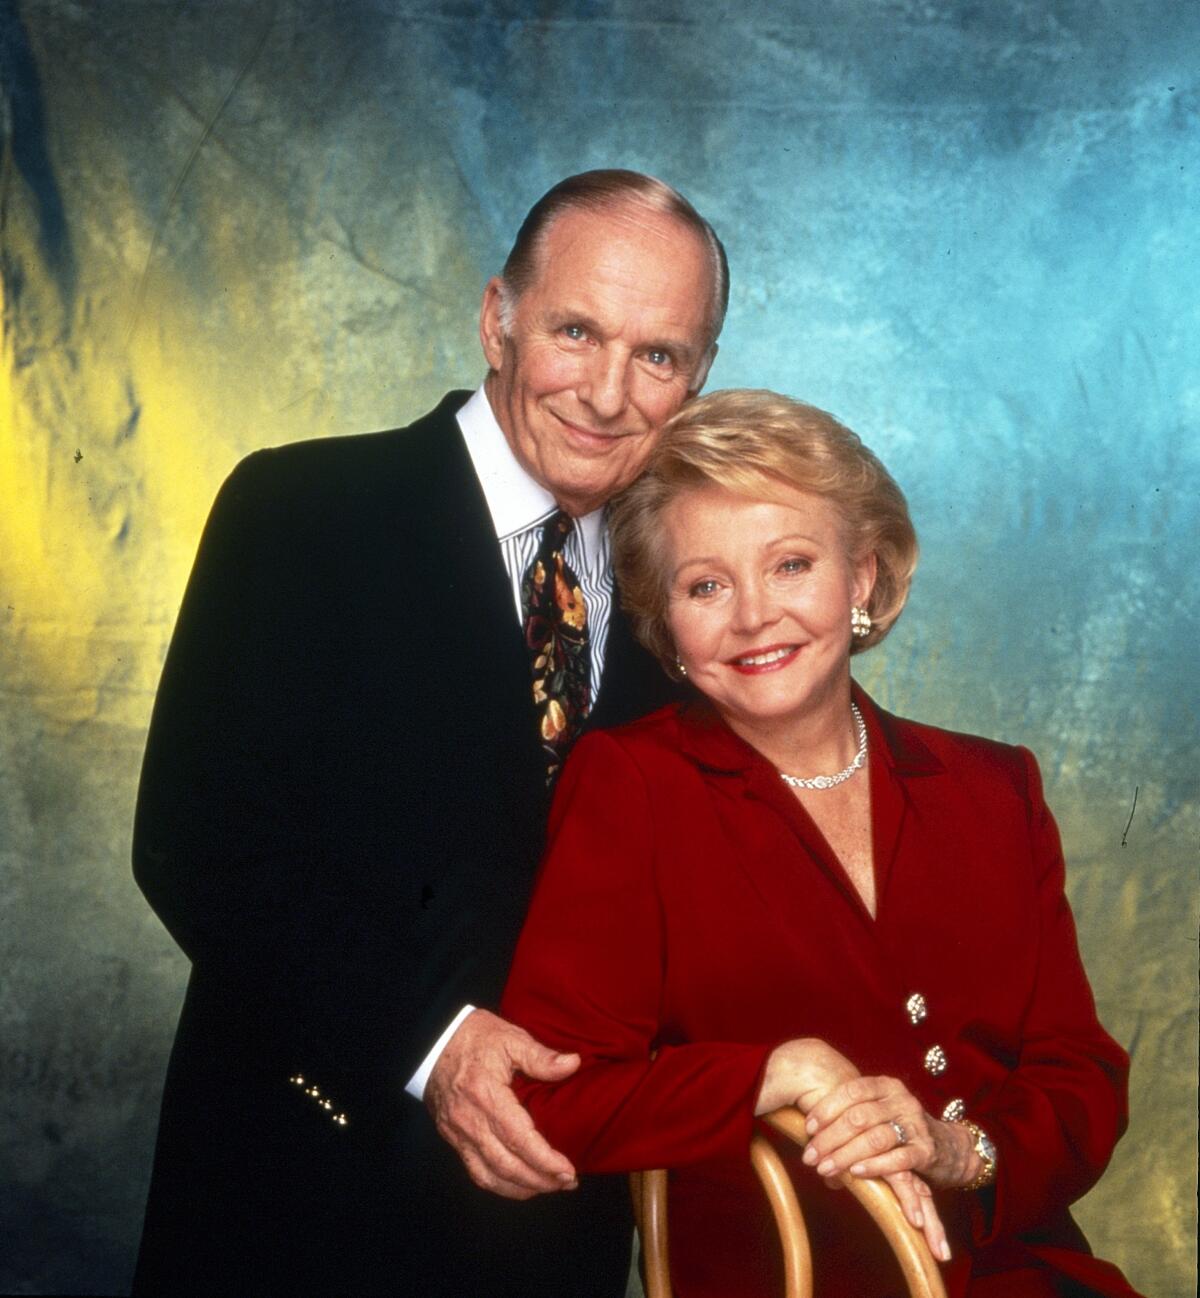 A man in a dark suit leans against a woman in a red suit, who is sitting on a chair with her arm resting on top.